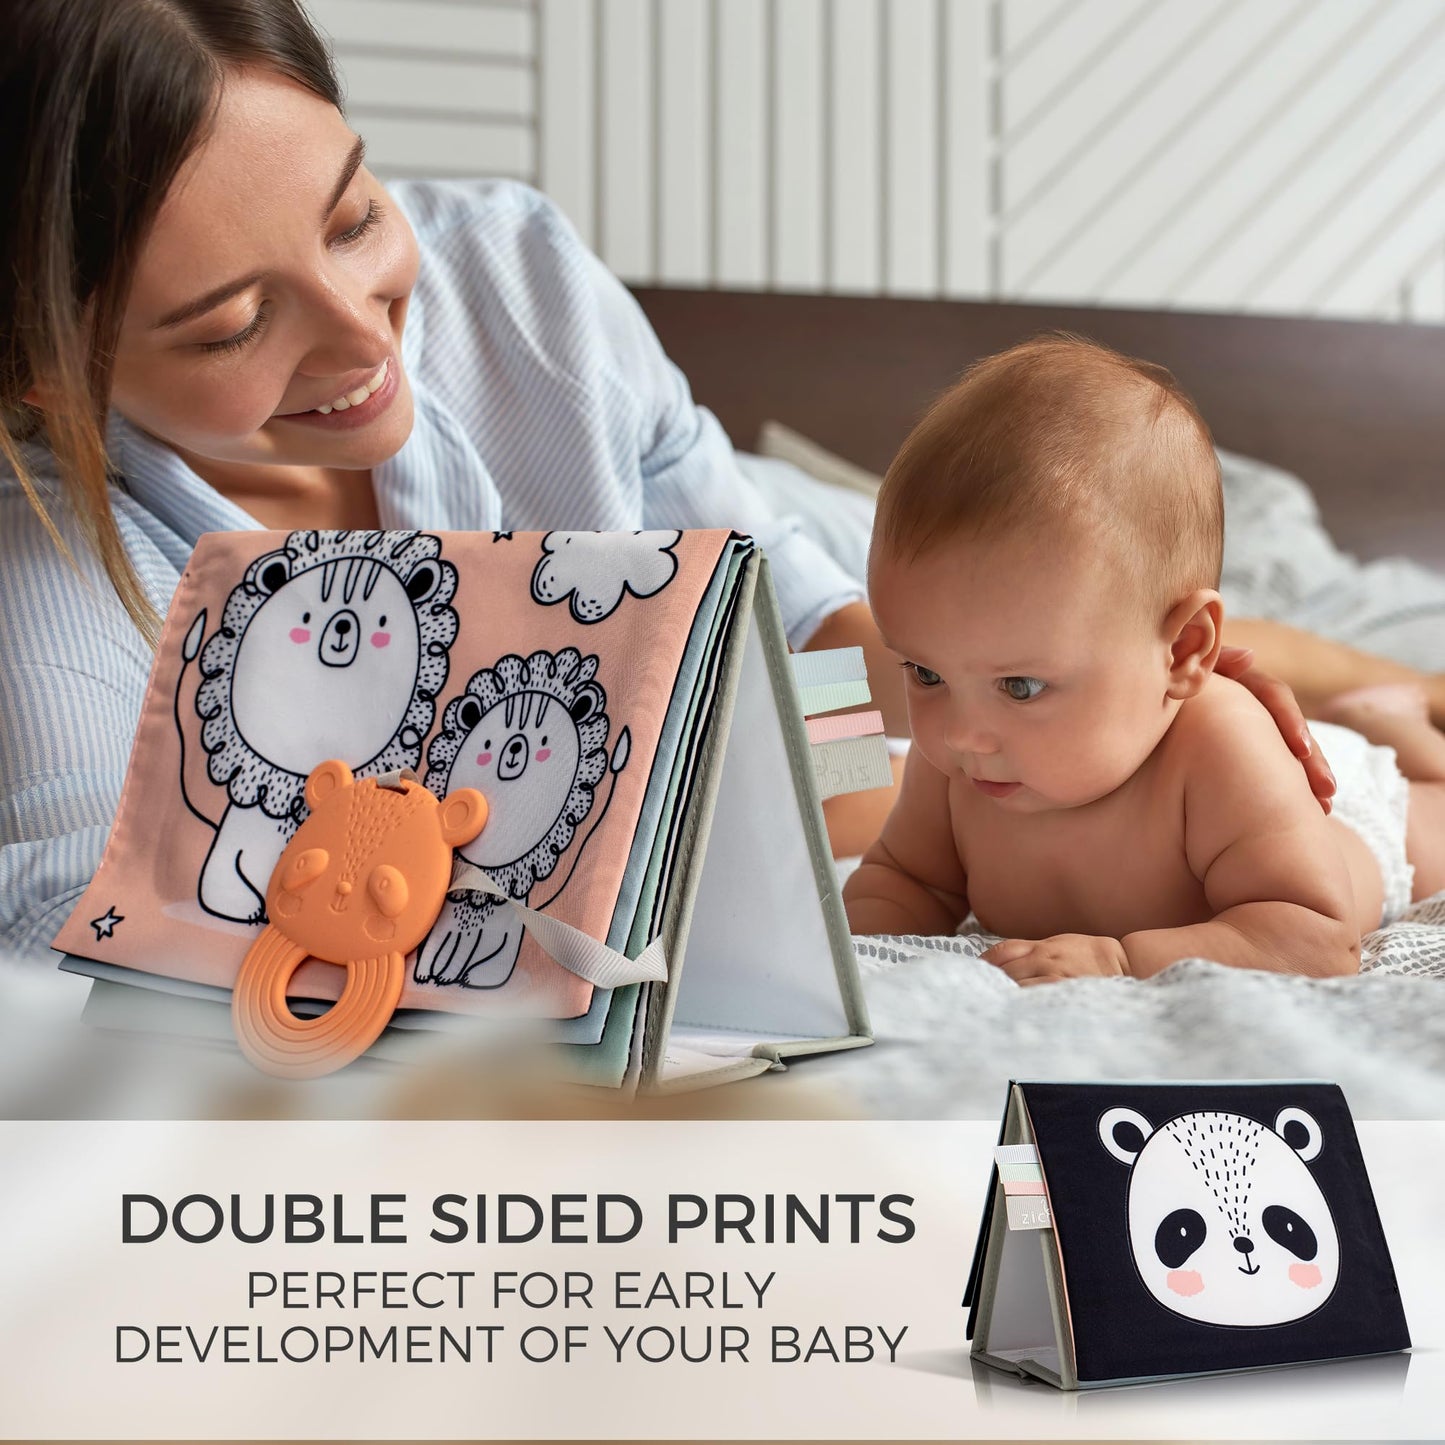 Soft Tummy Time Book w/ Large Stimulating Baby Safe Mirror - Fun High Contrast Montessori Toy w/ Mirror, Crinkle Filling & Silicone Teether - The Perfect Toy For Safe Early Newborn/Infant Development